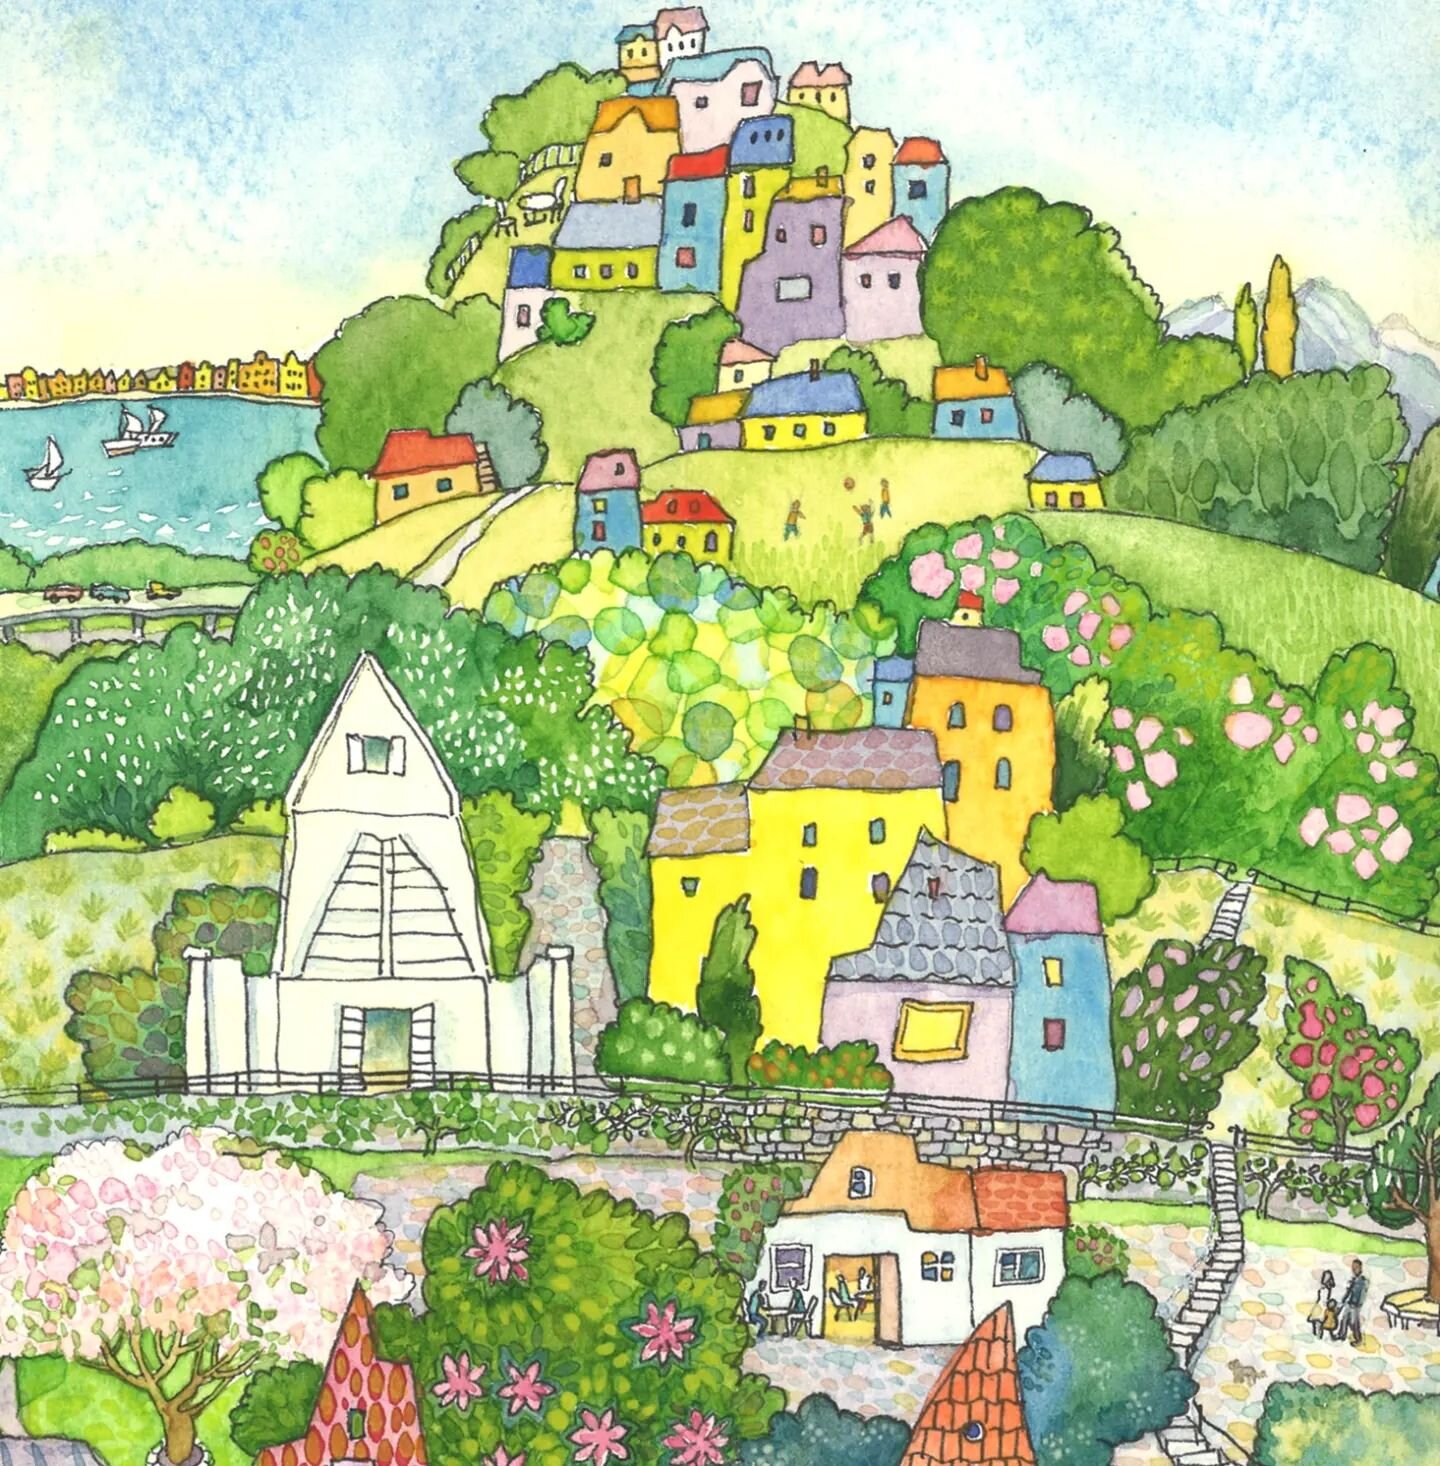 The first thing that amazed me when I arrived to Bergen about 7 years ago was the high mountain with pretty little houses going up the steep hill like in a fairy tale. 
That made me think of the verse: &quot;A city on a hill can not be hidden&quot; A